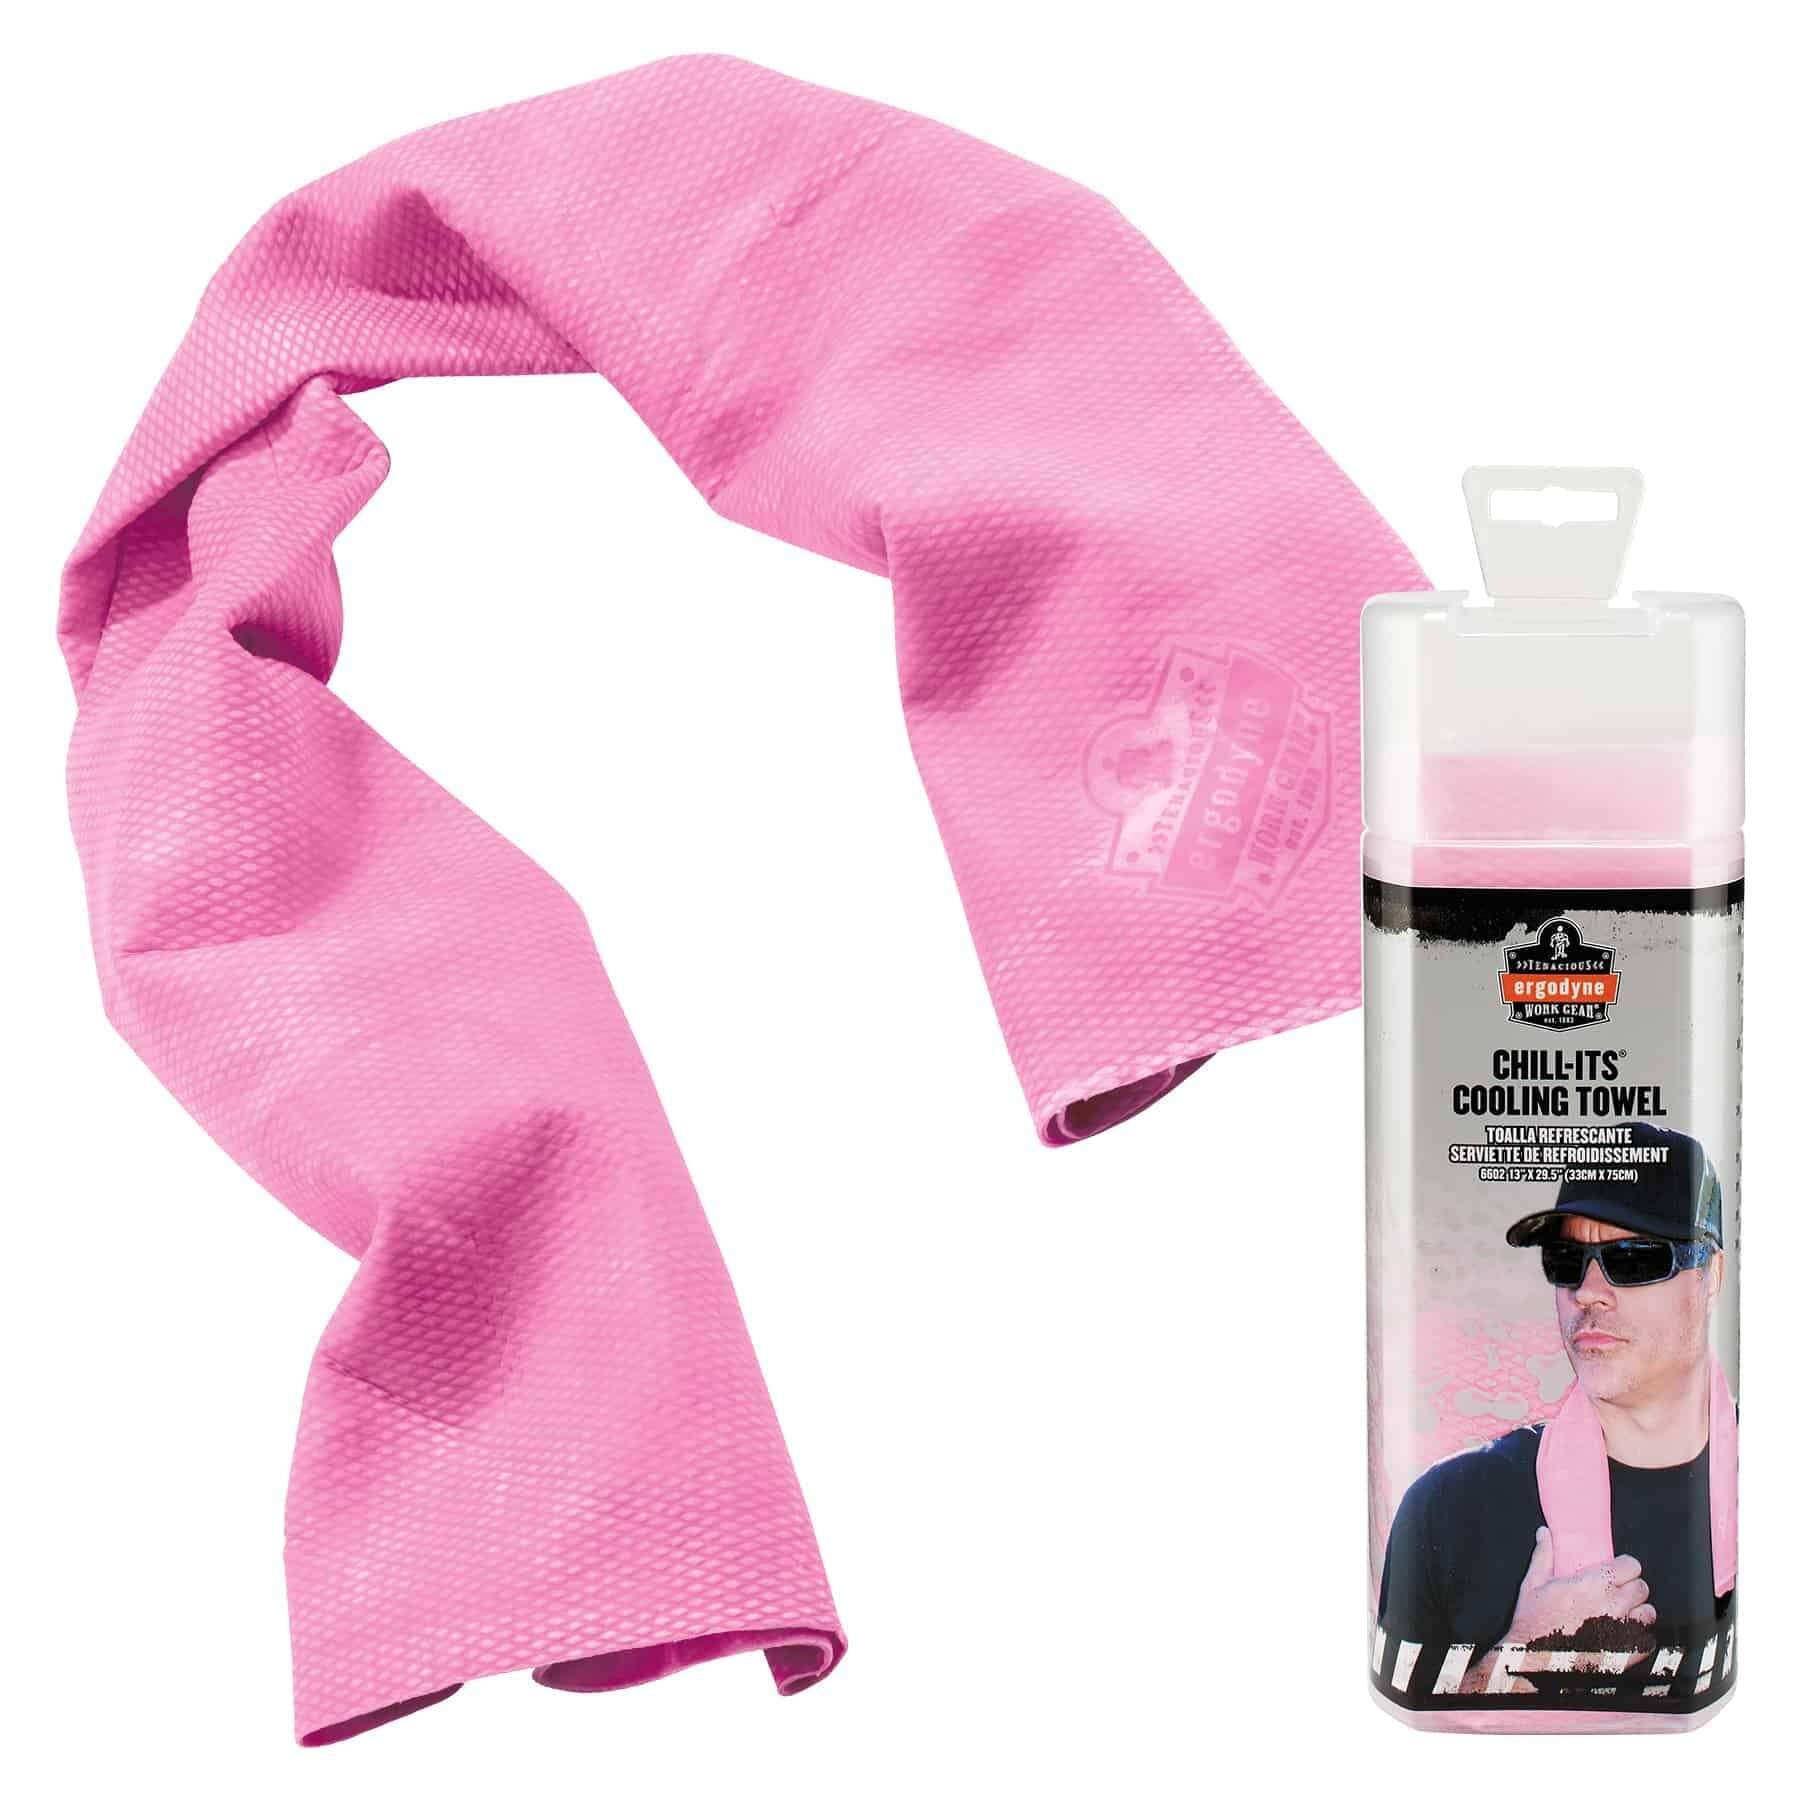 Vacnite Cooling Towel for Instant Relief 100cm x 30 cm Pink 